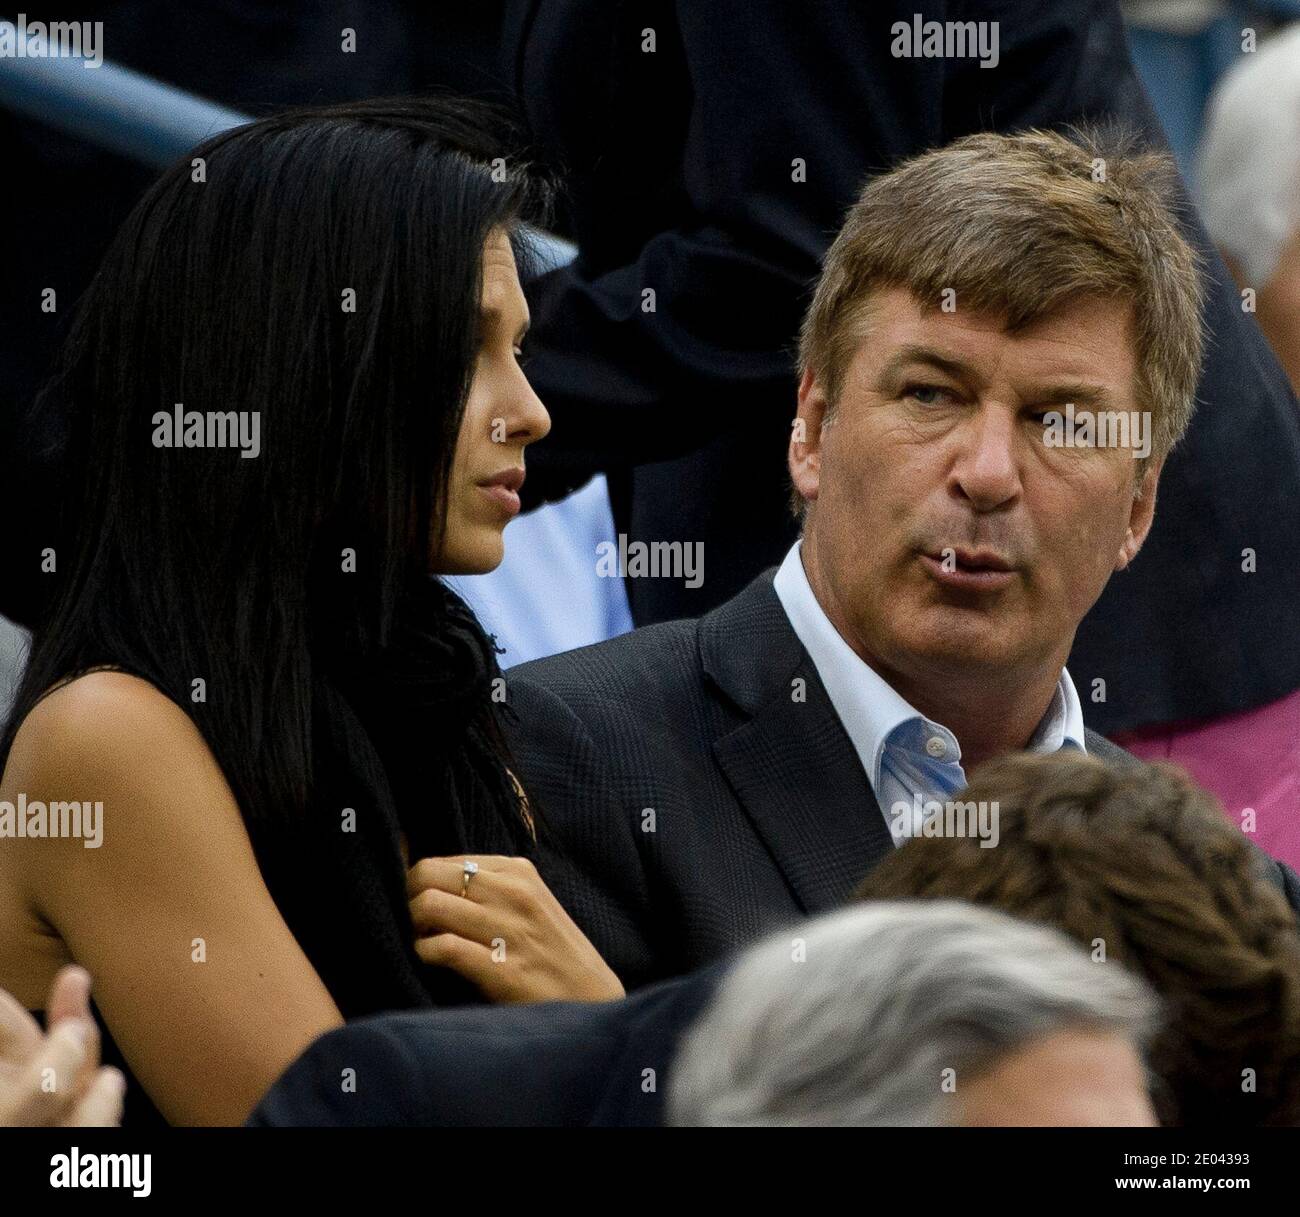 Queens, United States Of America. 11th Sep, 2011. NEW YORK, NY - SEPTEMBER11: Alec Baldwin Hilaria Thomas watches Samantha Stosur of Australia (AUS) defeat American Serena Williams (USA) to win the Woman's Singles Championship on Day 14 of the 2011 U.S. Open Tennis Championships at the USTA Billie Jean King National Tennis Center on September 11, 2011 in the Flushing neighborhood of the Queens borough of New York City. People: Alec Baldwin Hilaria Thomas Credit: Storms Media Group/Alamy Live News Stock Photo